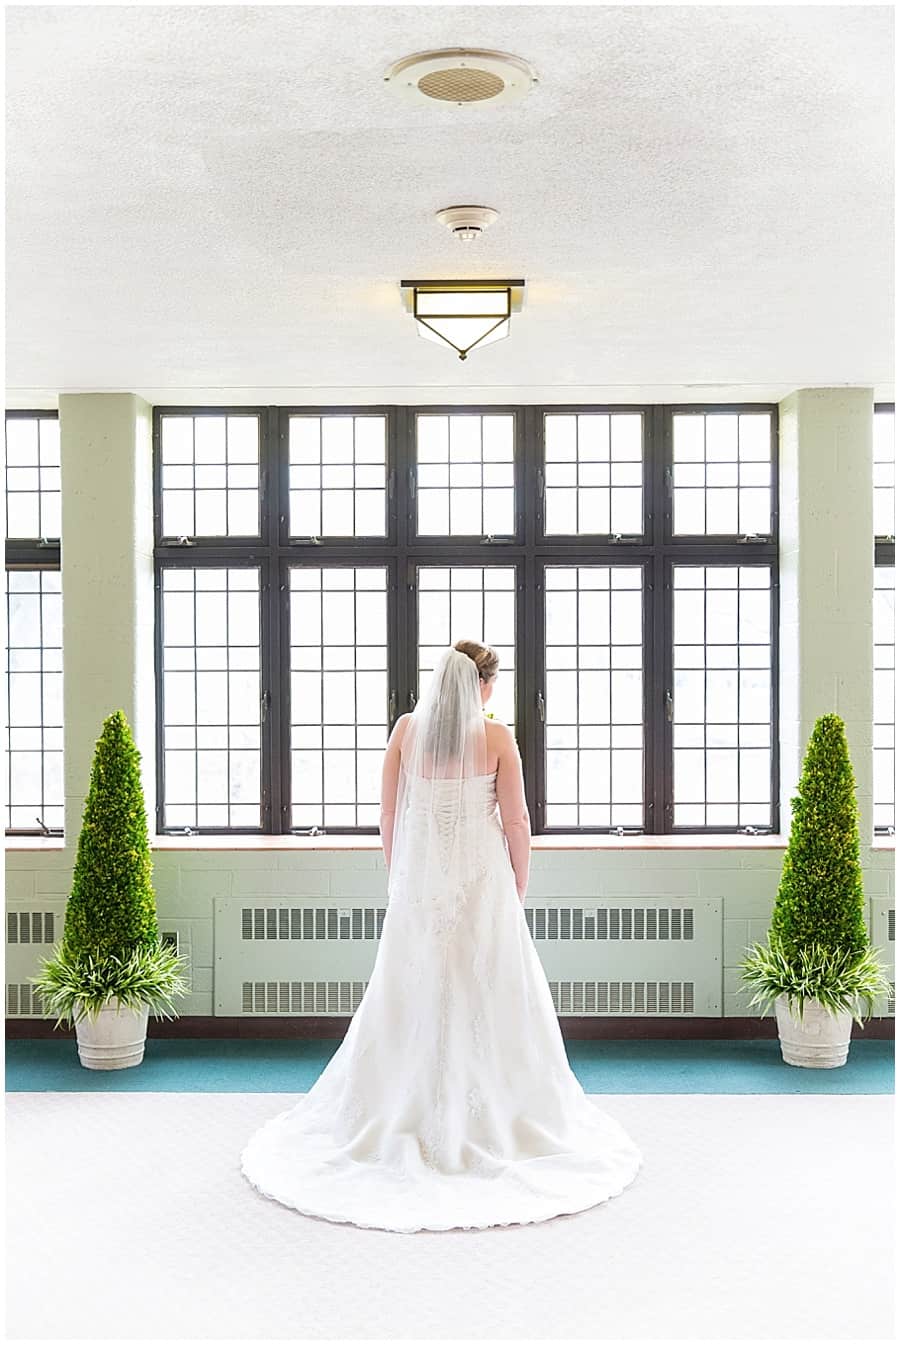 Bride in front of stained glass windows before wedding